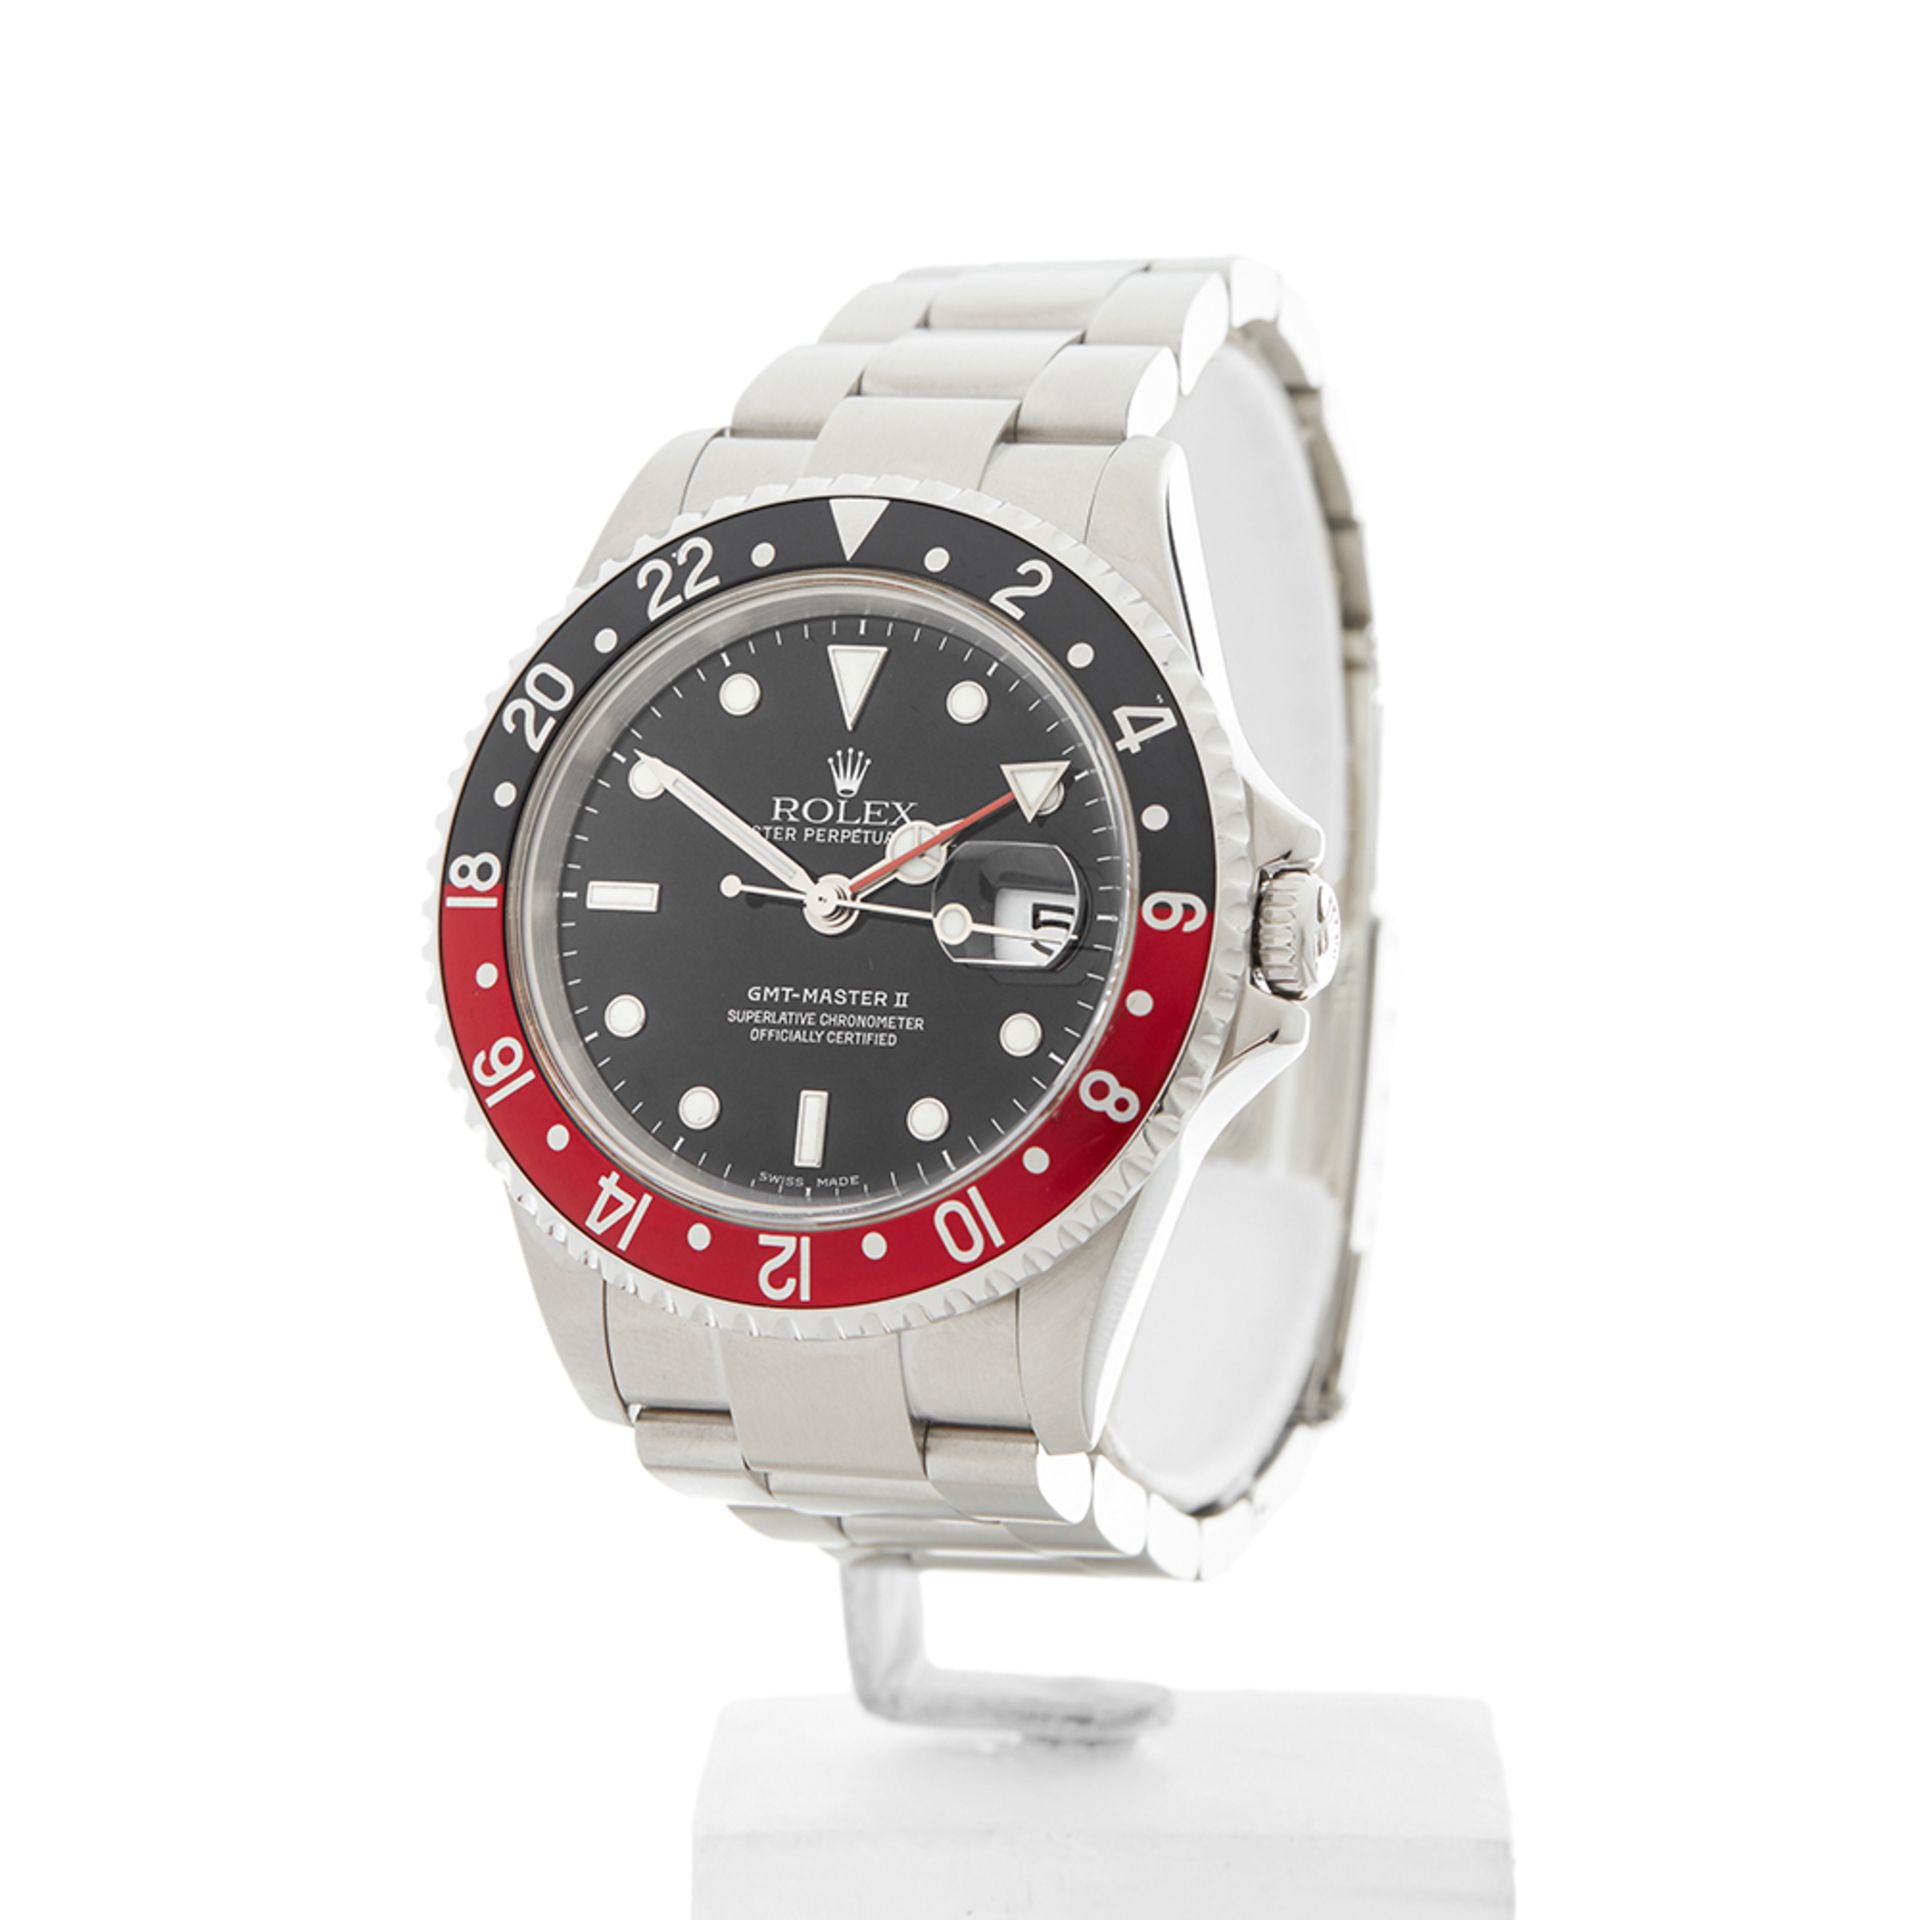 Rolex GMT-Master II Coke 40mm Stainless Steel 16710 - Image 3 of 8